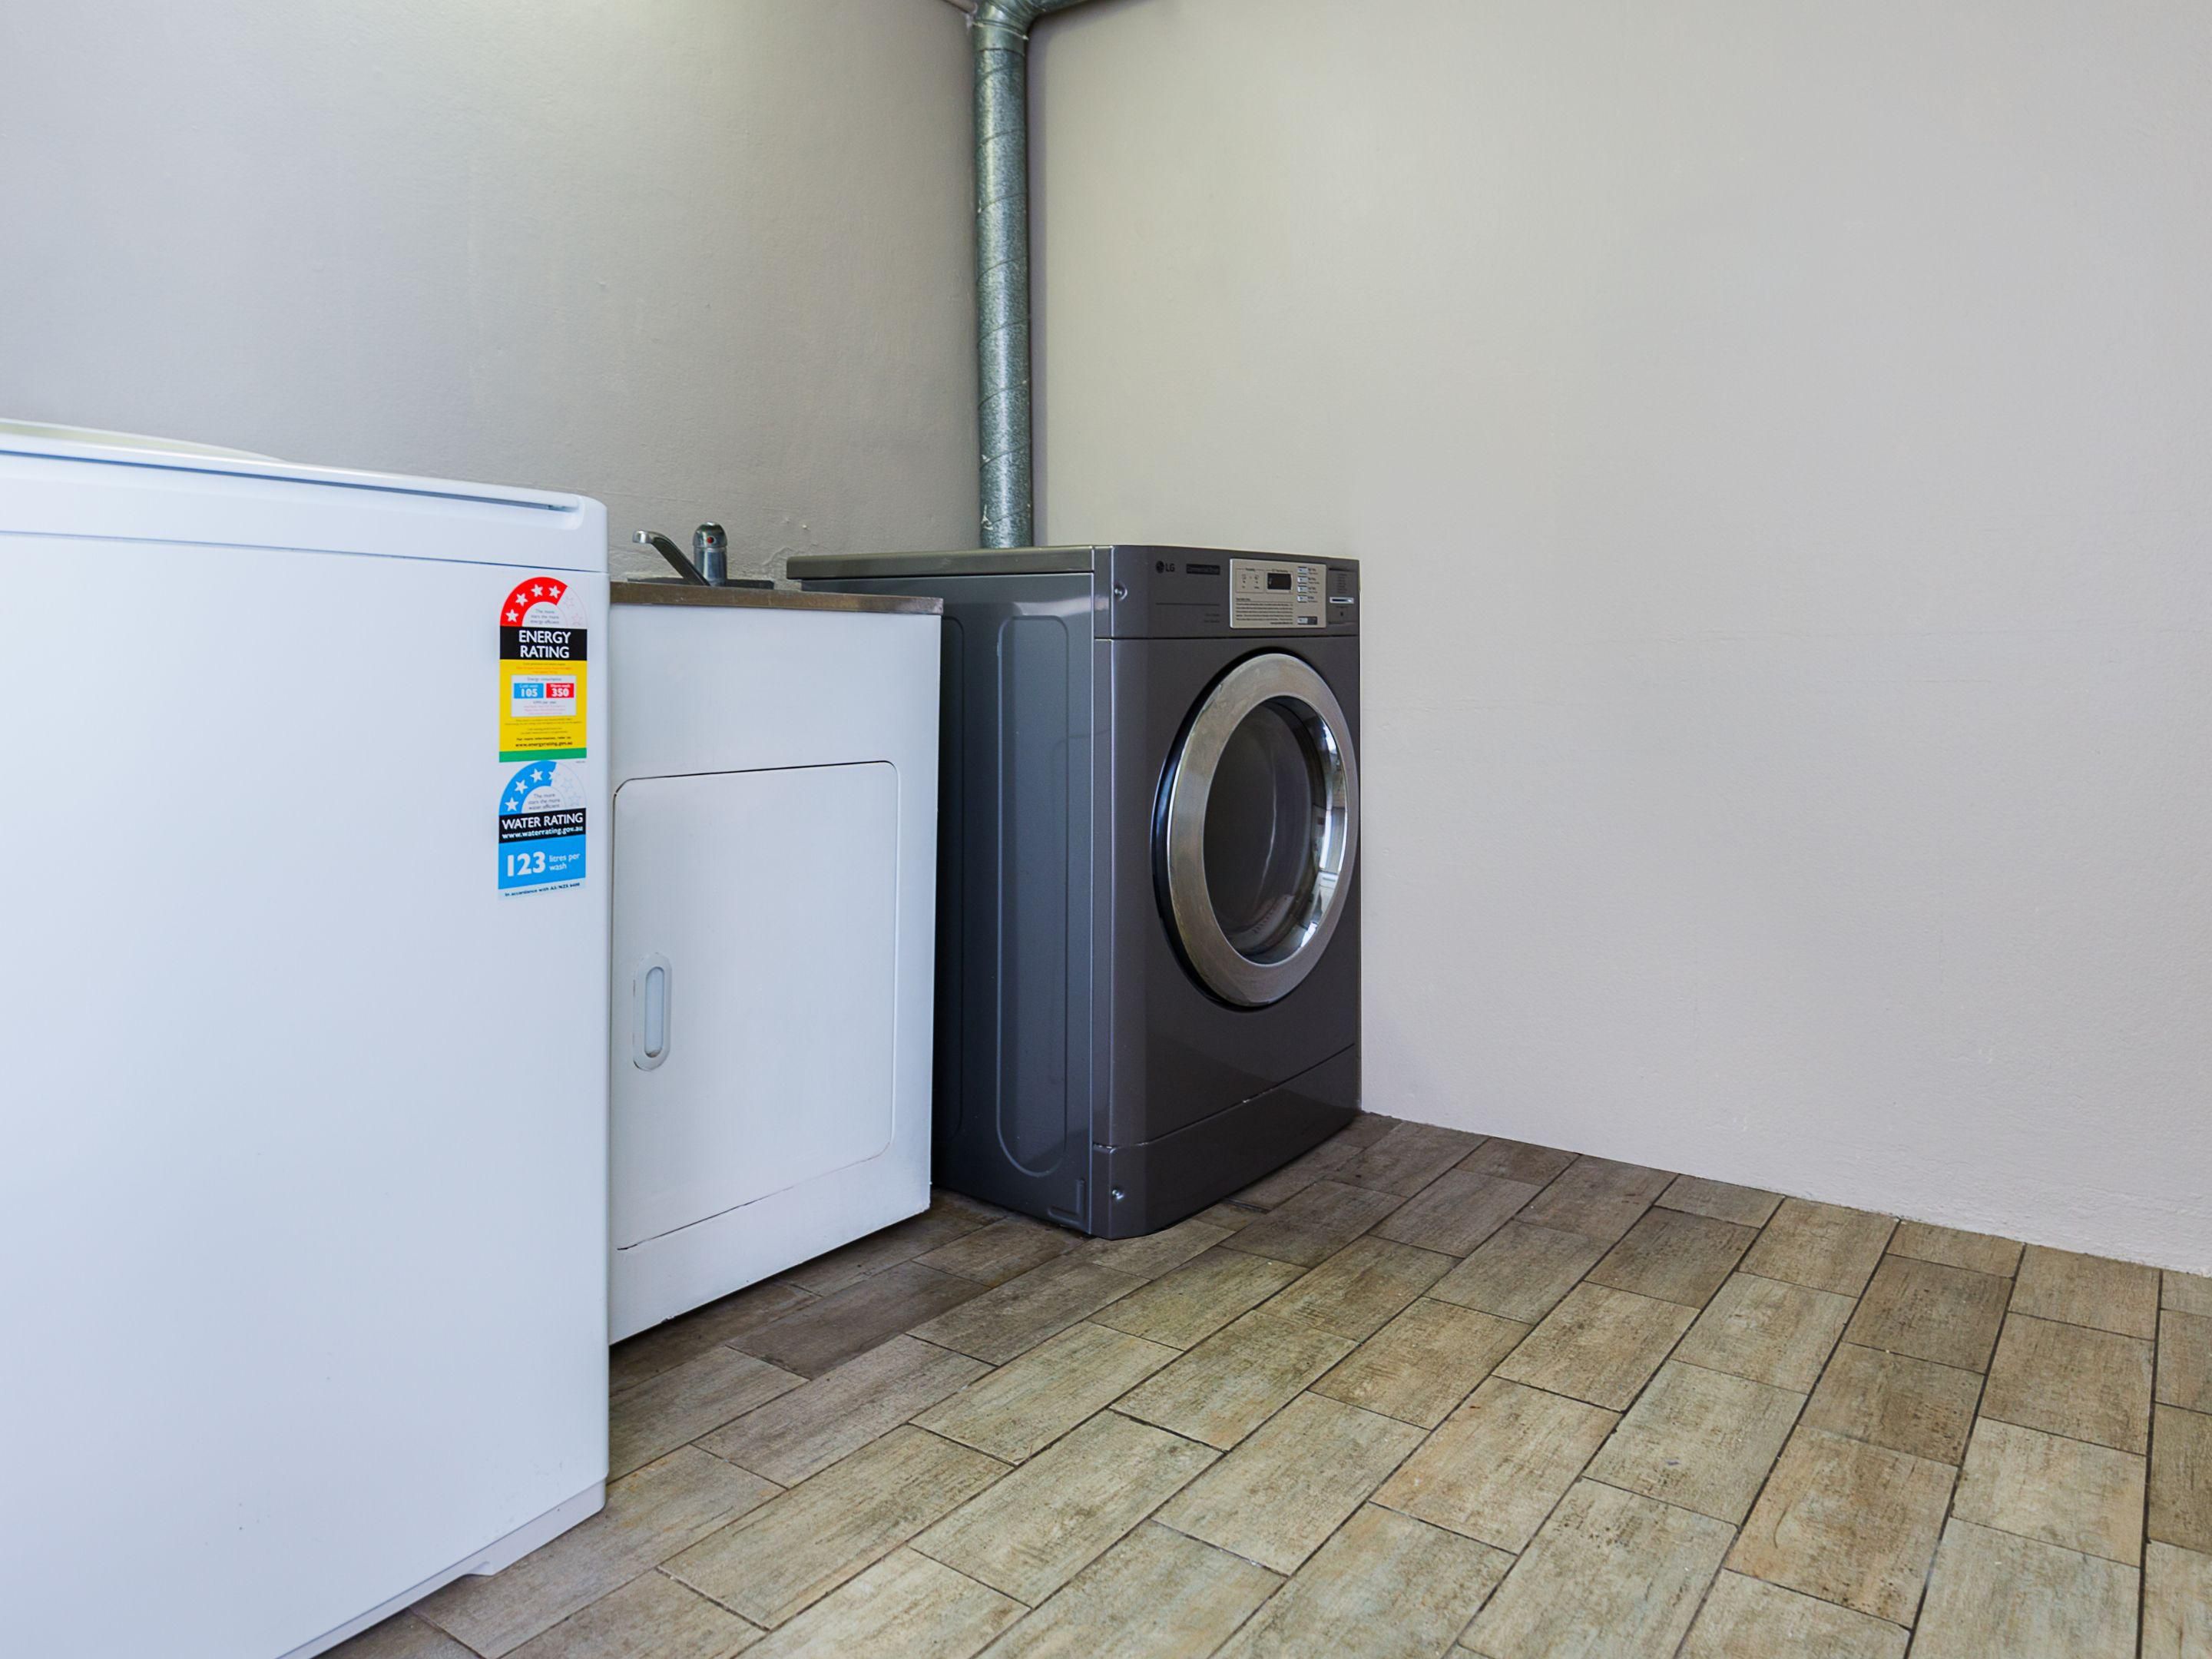 Take advantage of our complimentary self-service laundry facilities, complete with washers and dryers. Say goodbye to laundry worries and free up valuable time for your business or leisure pursuits. Enjoy the convenience and ease of keeping your clothes fresh and clean during your stay.